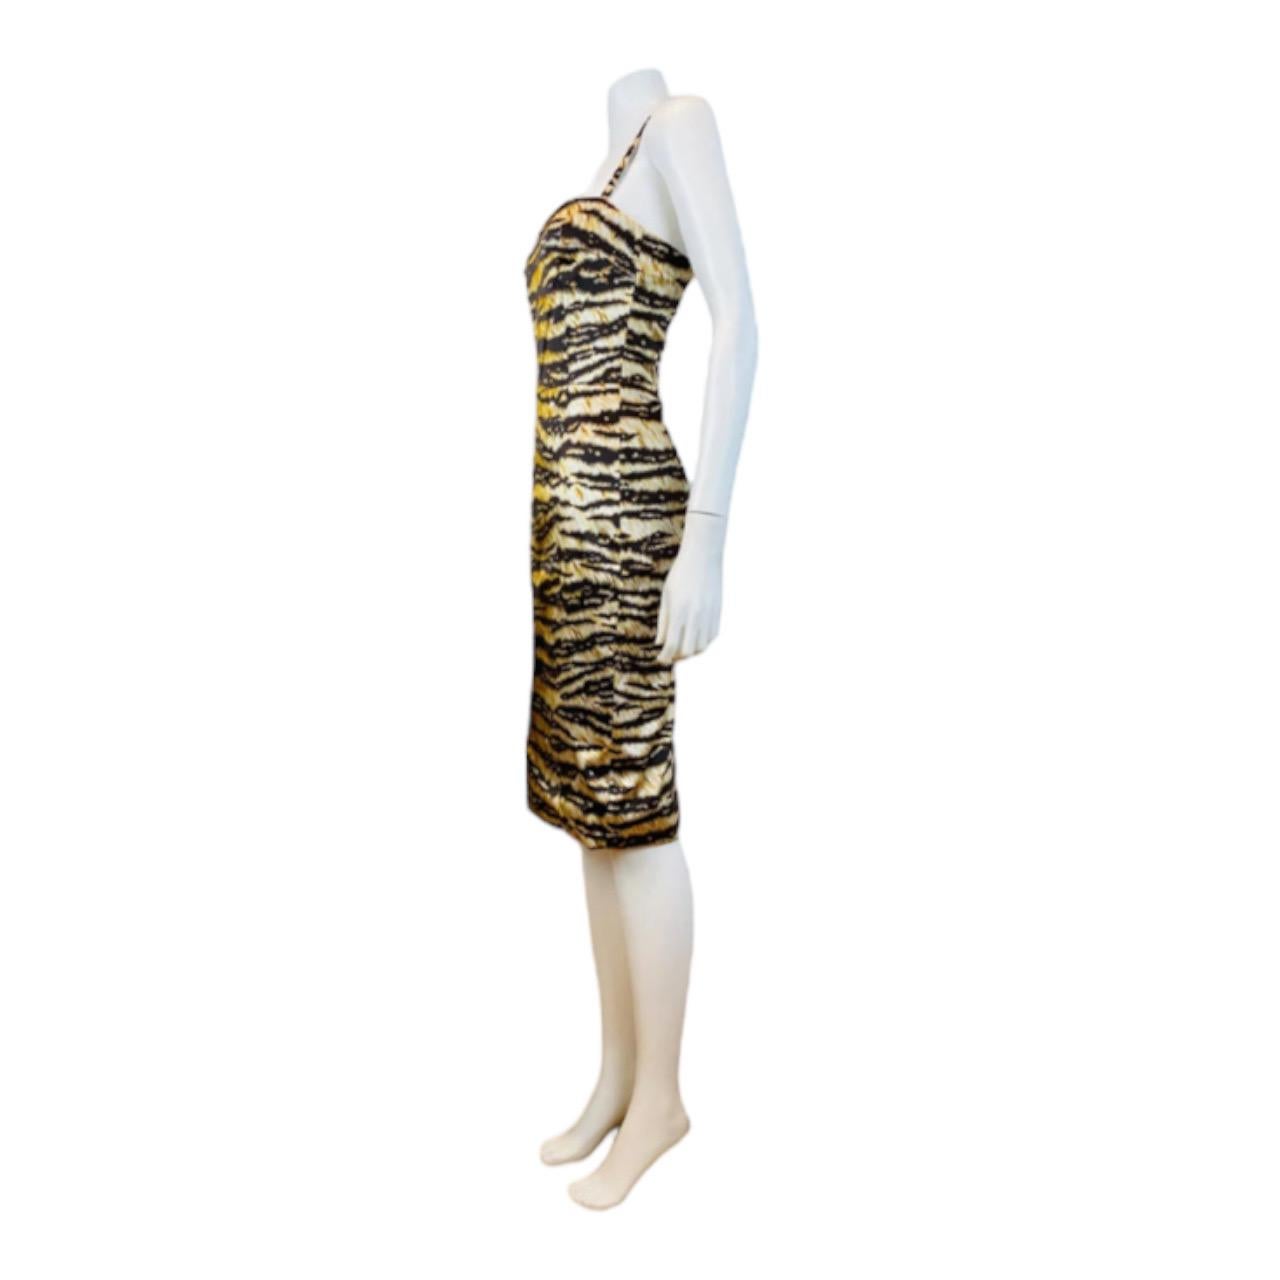 Vintage Dolce + Gabbana 2000s Y2K Tiger Stripe Stretch Silk Dress New With Tags In Excellent Condition For Sale In Denver, CO